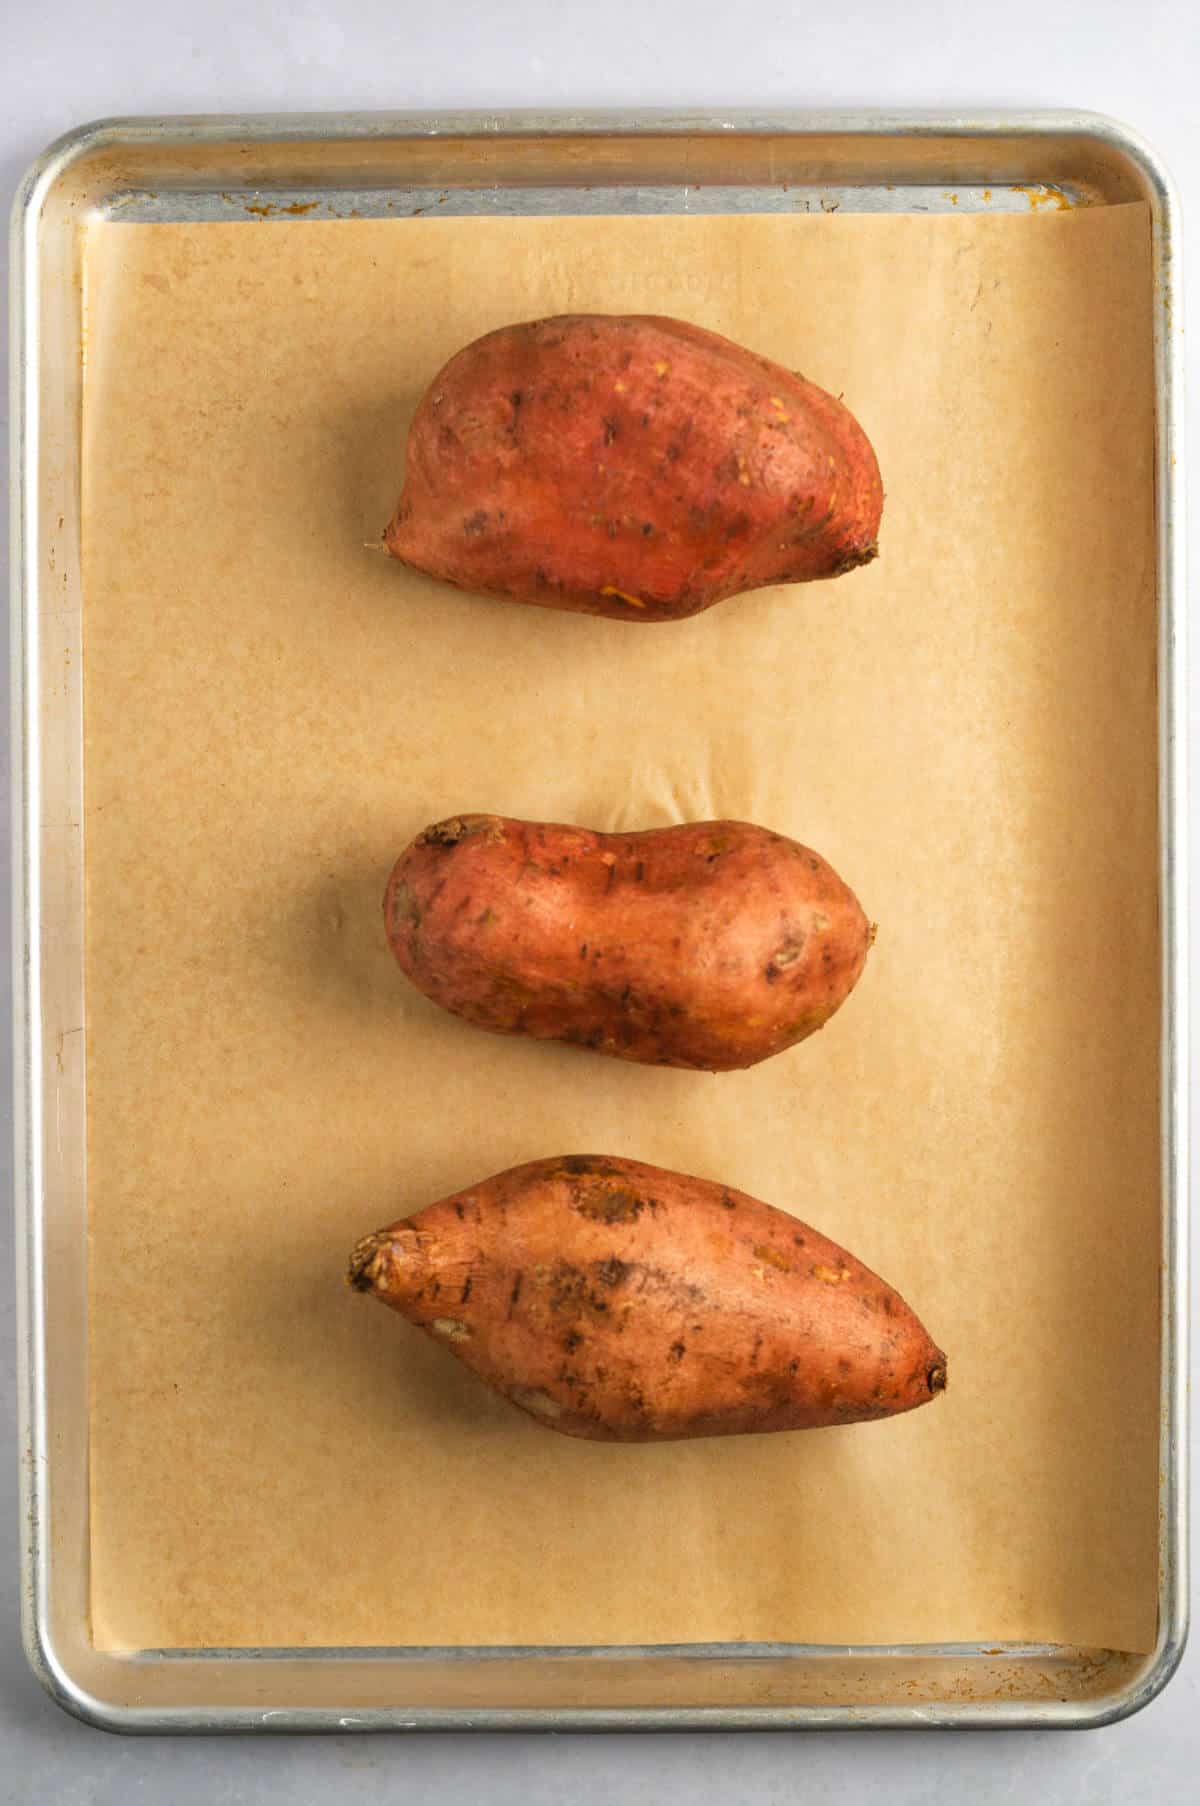 Three sweet potatoes in a line on a parchment-lined baking sheet.